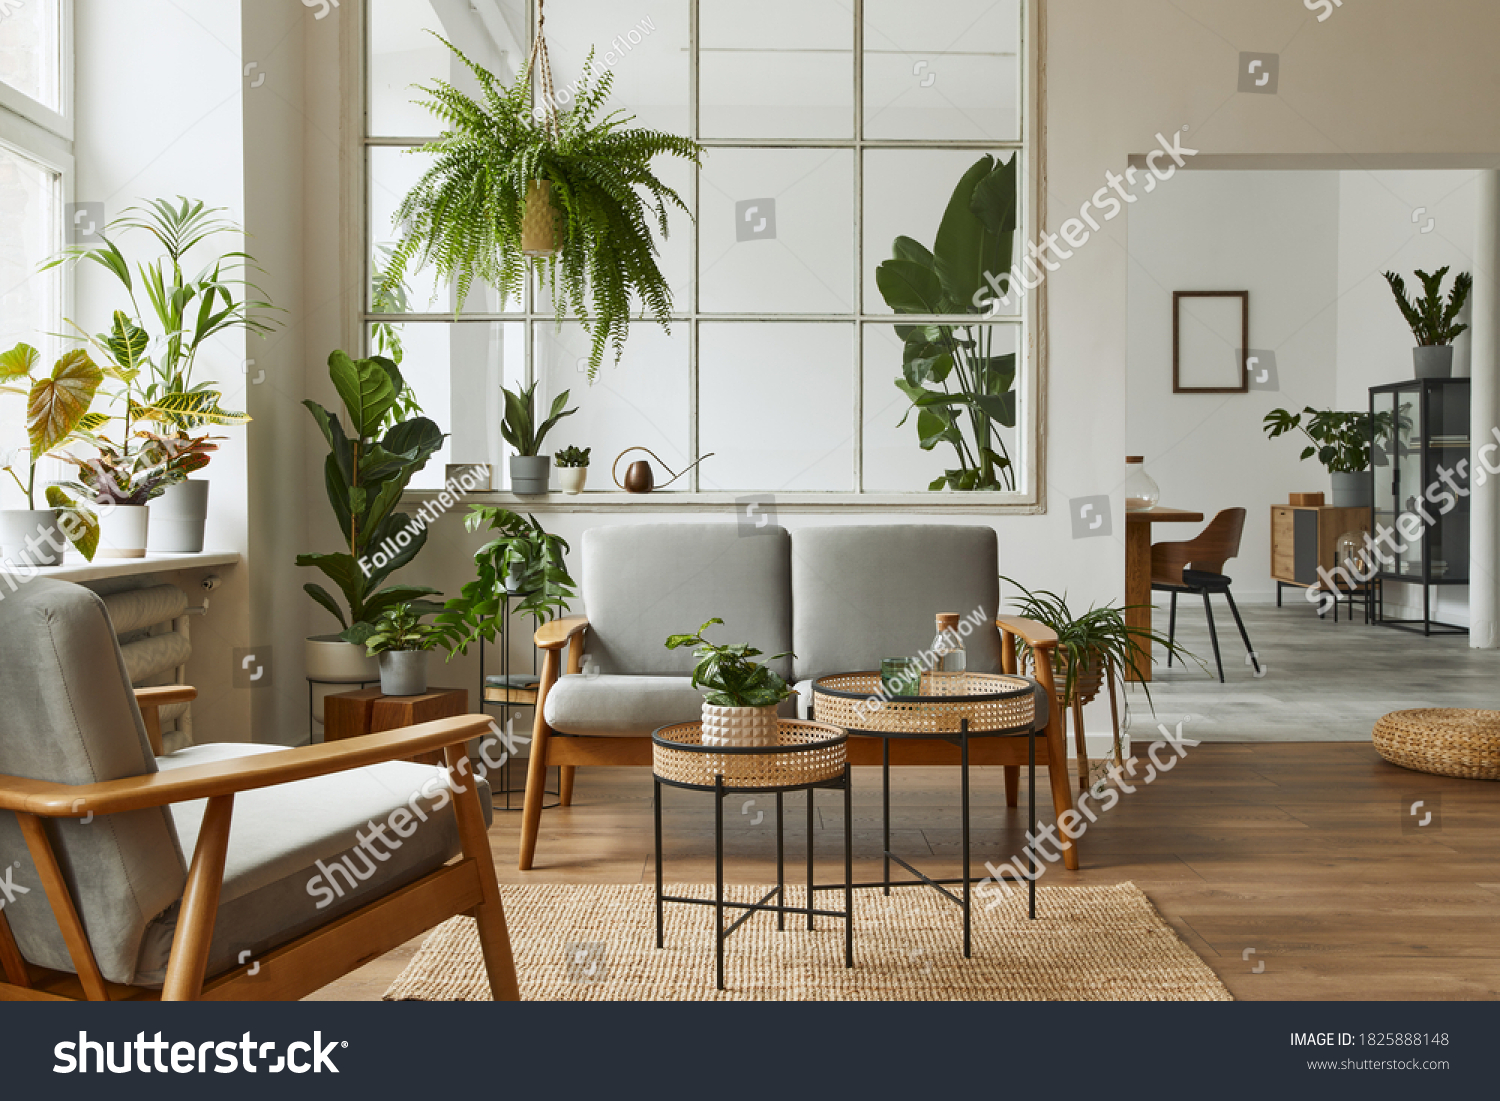 Modern scandinavian interior of living room with design grey sofa, armchair, a lot of plants, coffee table, carpet and personal accessories in cozy home decor. Template. #1825888148